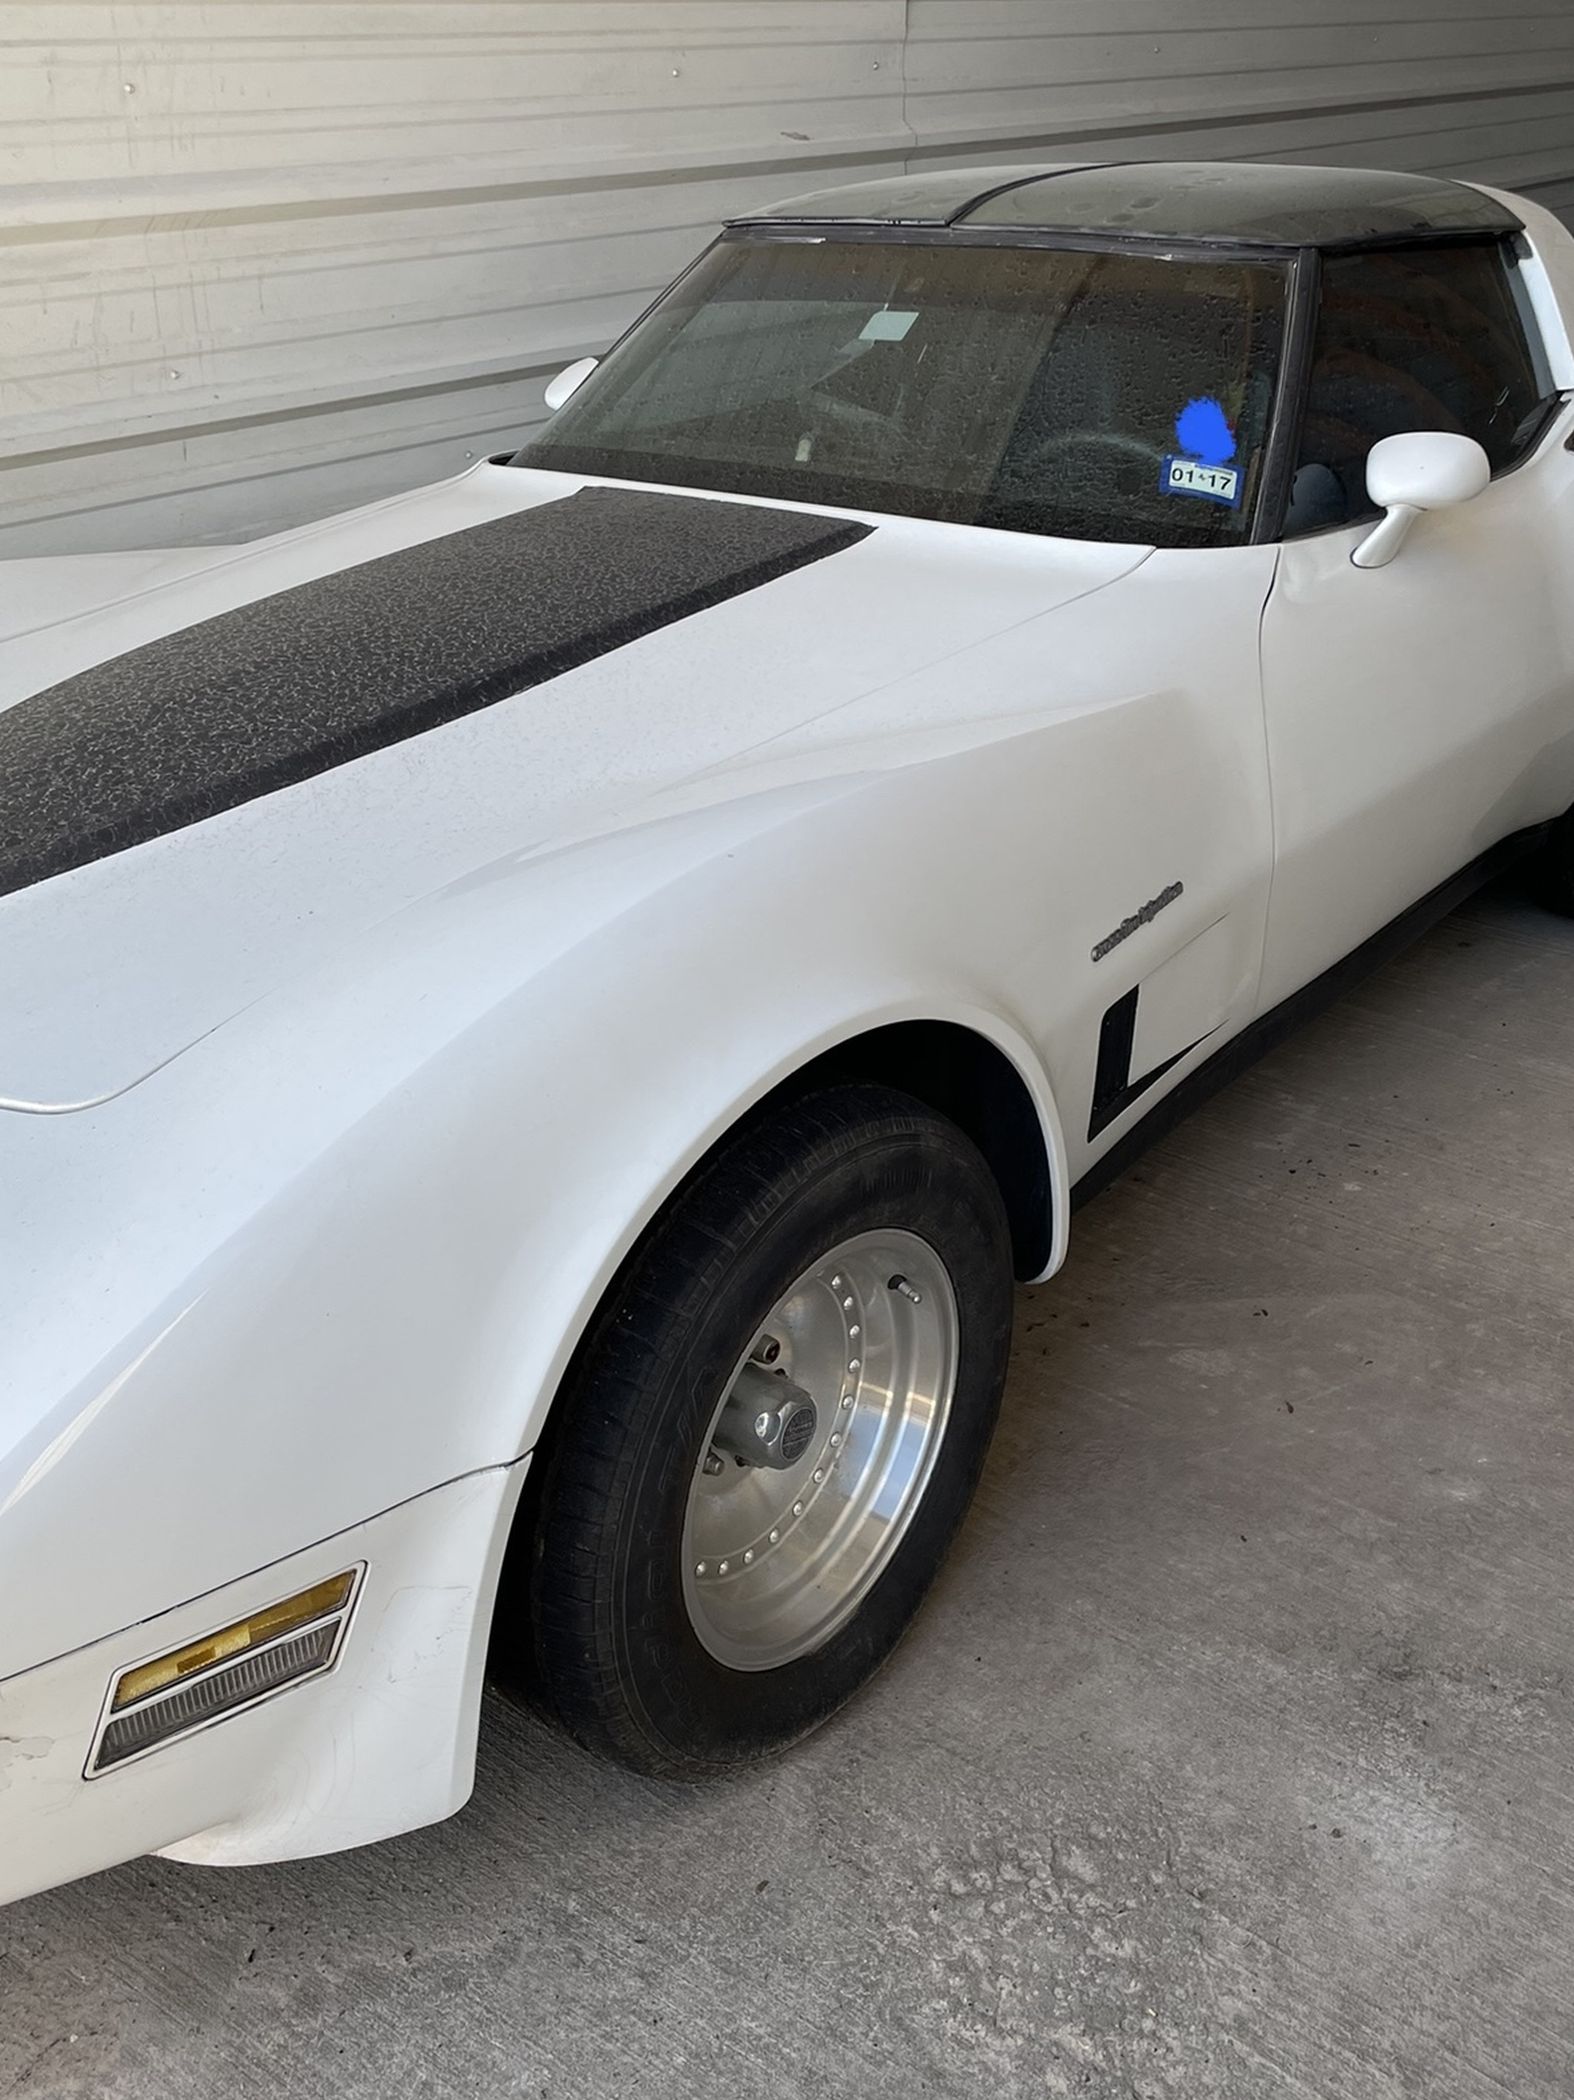 1982 Chevy Corvette Rolling Chassis W/ $6k In Parts